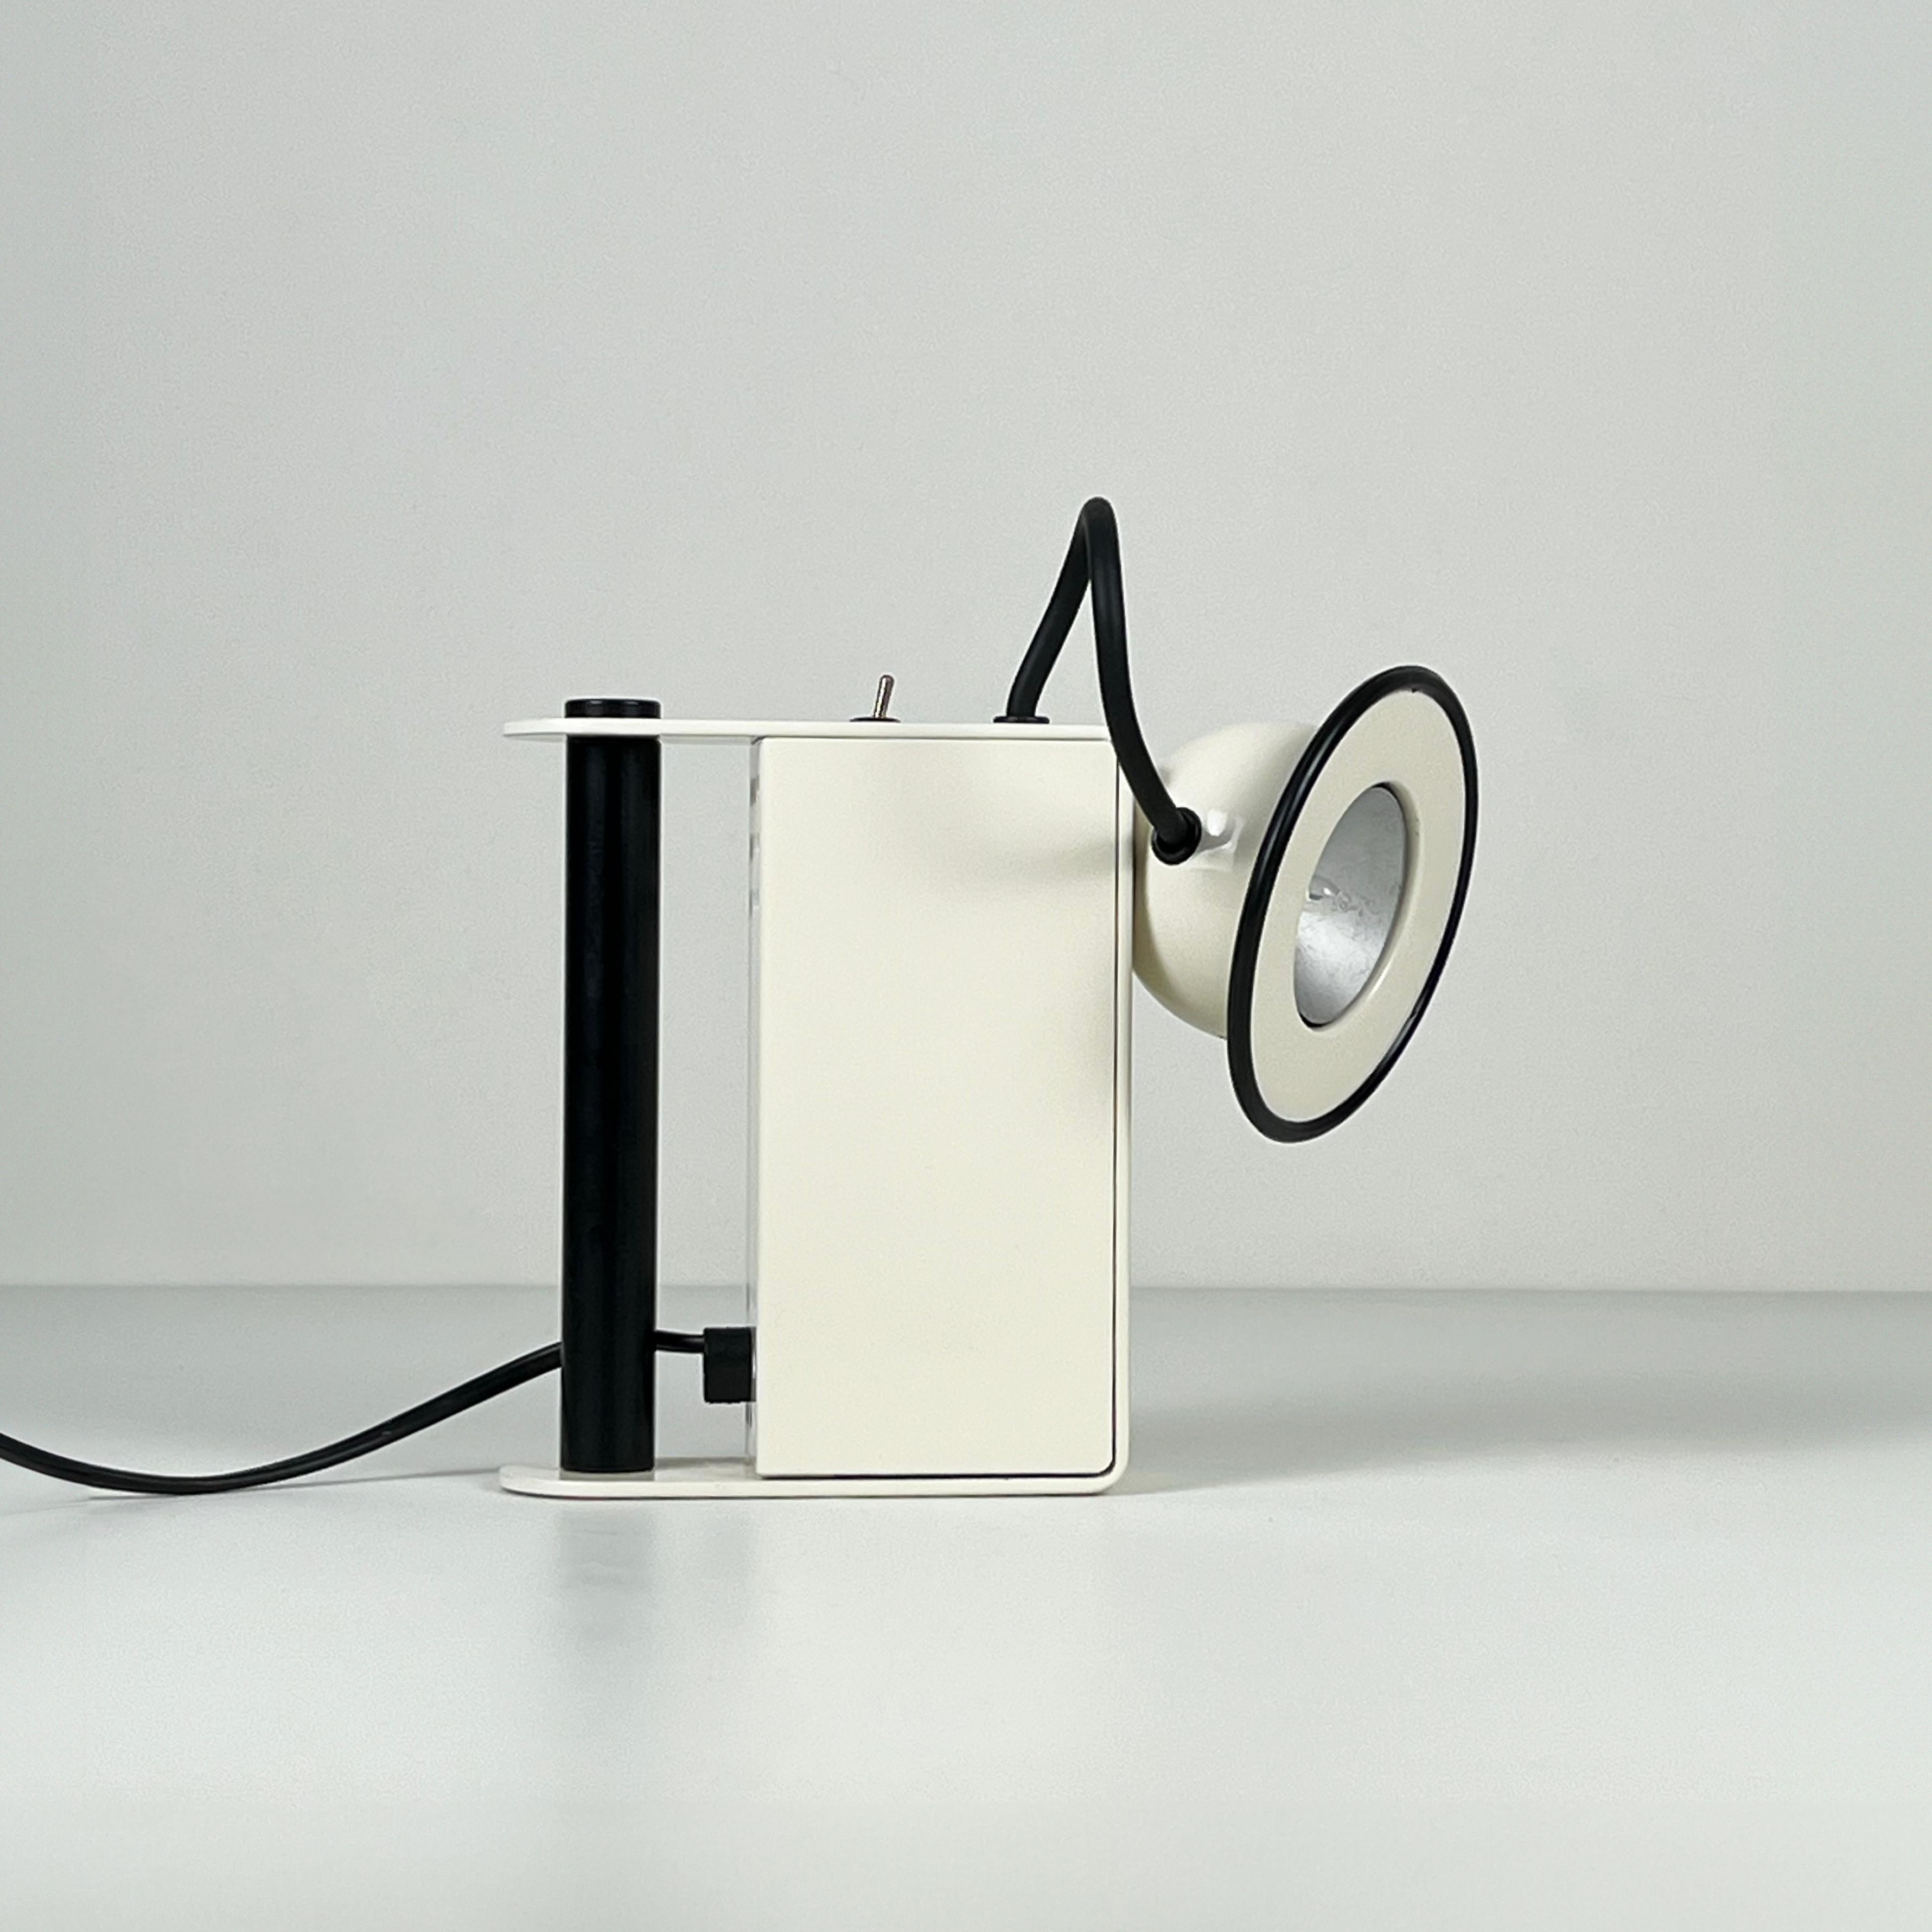 The 'Minibox' table lamp, conceived by Gae Aulenti and Piero Castiglioni in the 1980s, is a whimsical reinterpretation of a miner's 'torch.' Featuring a magnetic attachment, the reflector on the lamp's body offers users limitless options and optimal